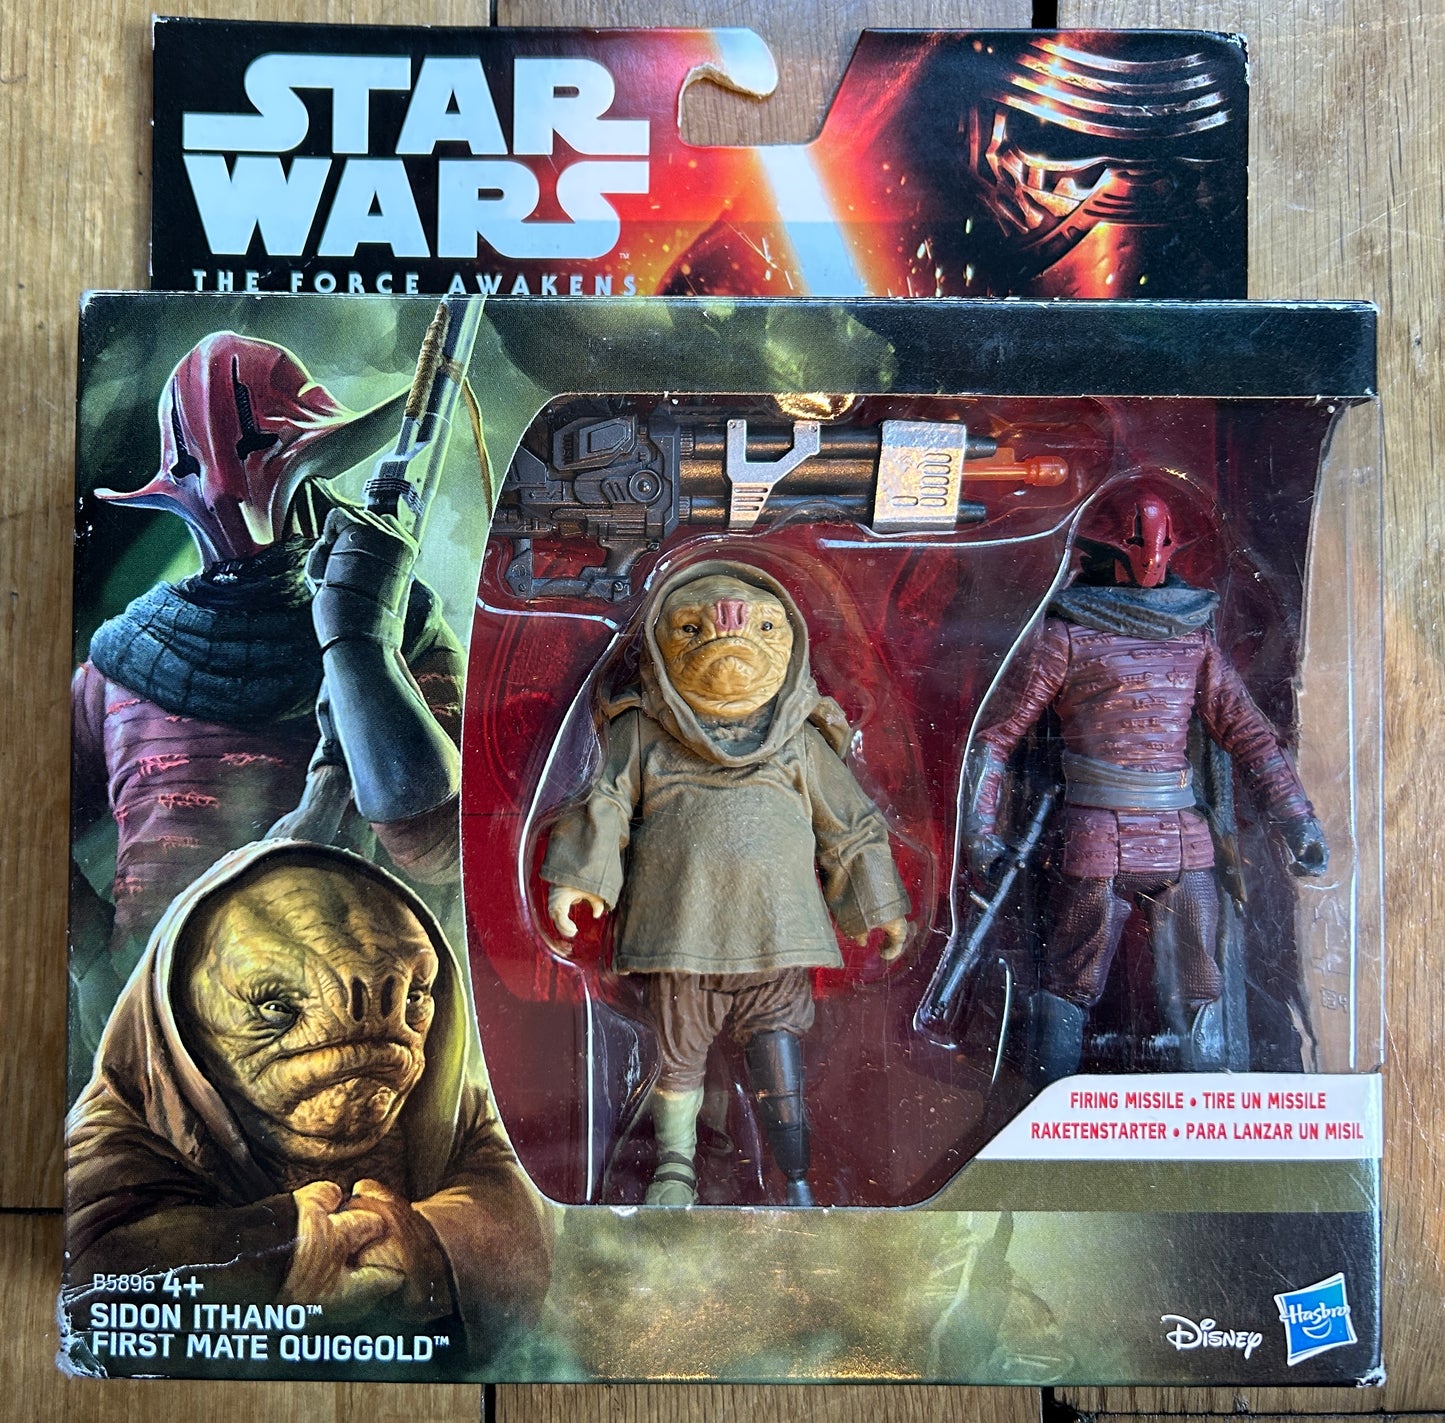 STAR WARS : The Force Awakens - 2 Figurines de Sidon Ithano et First Mate Quiggold